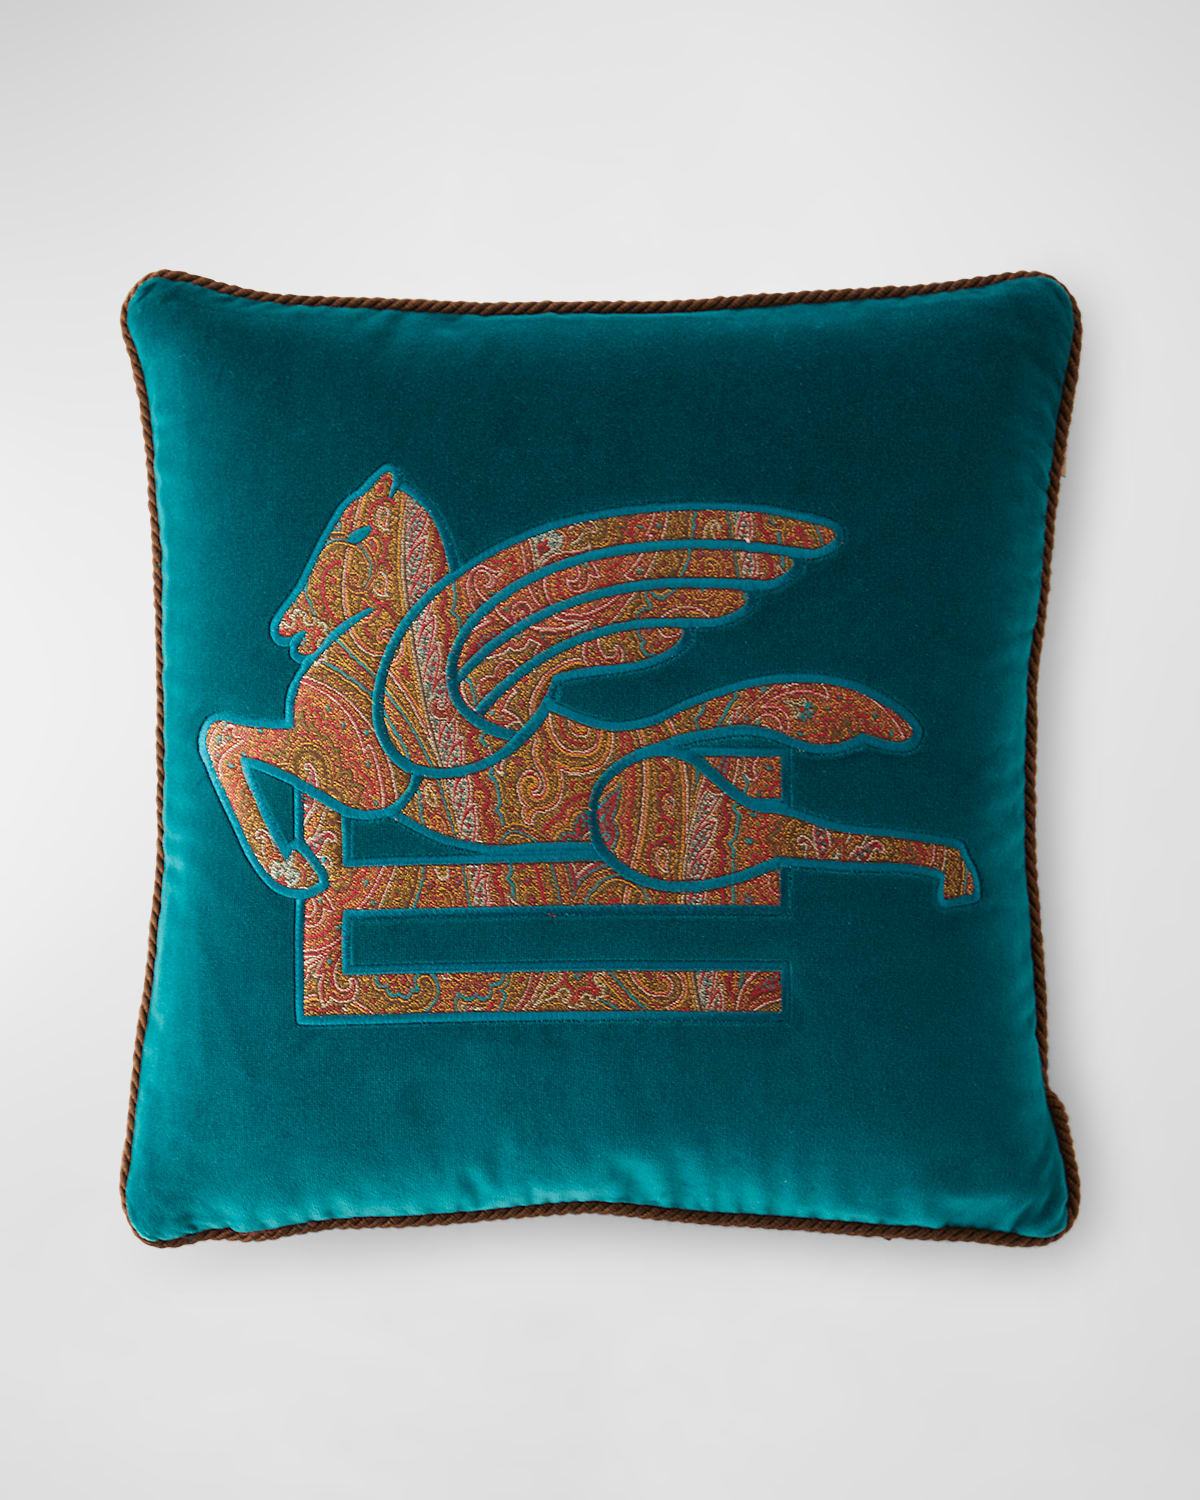 Etro New Somerset Embroidered Pillow, 18" Square In Blue